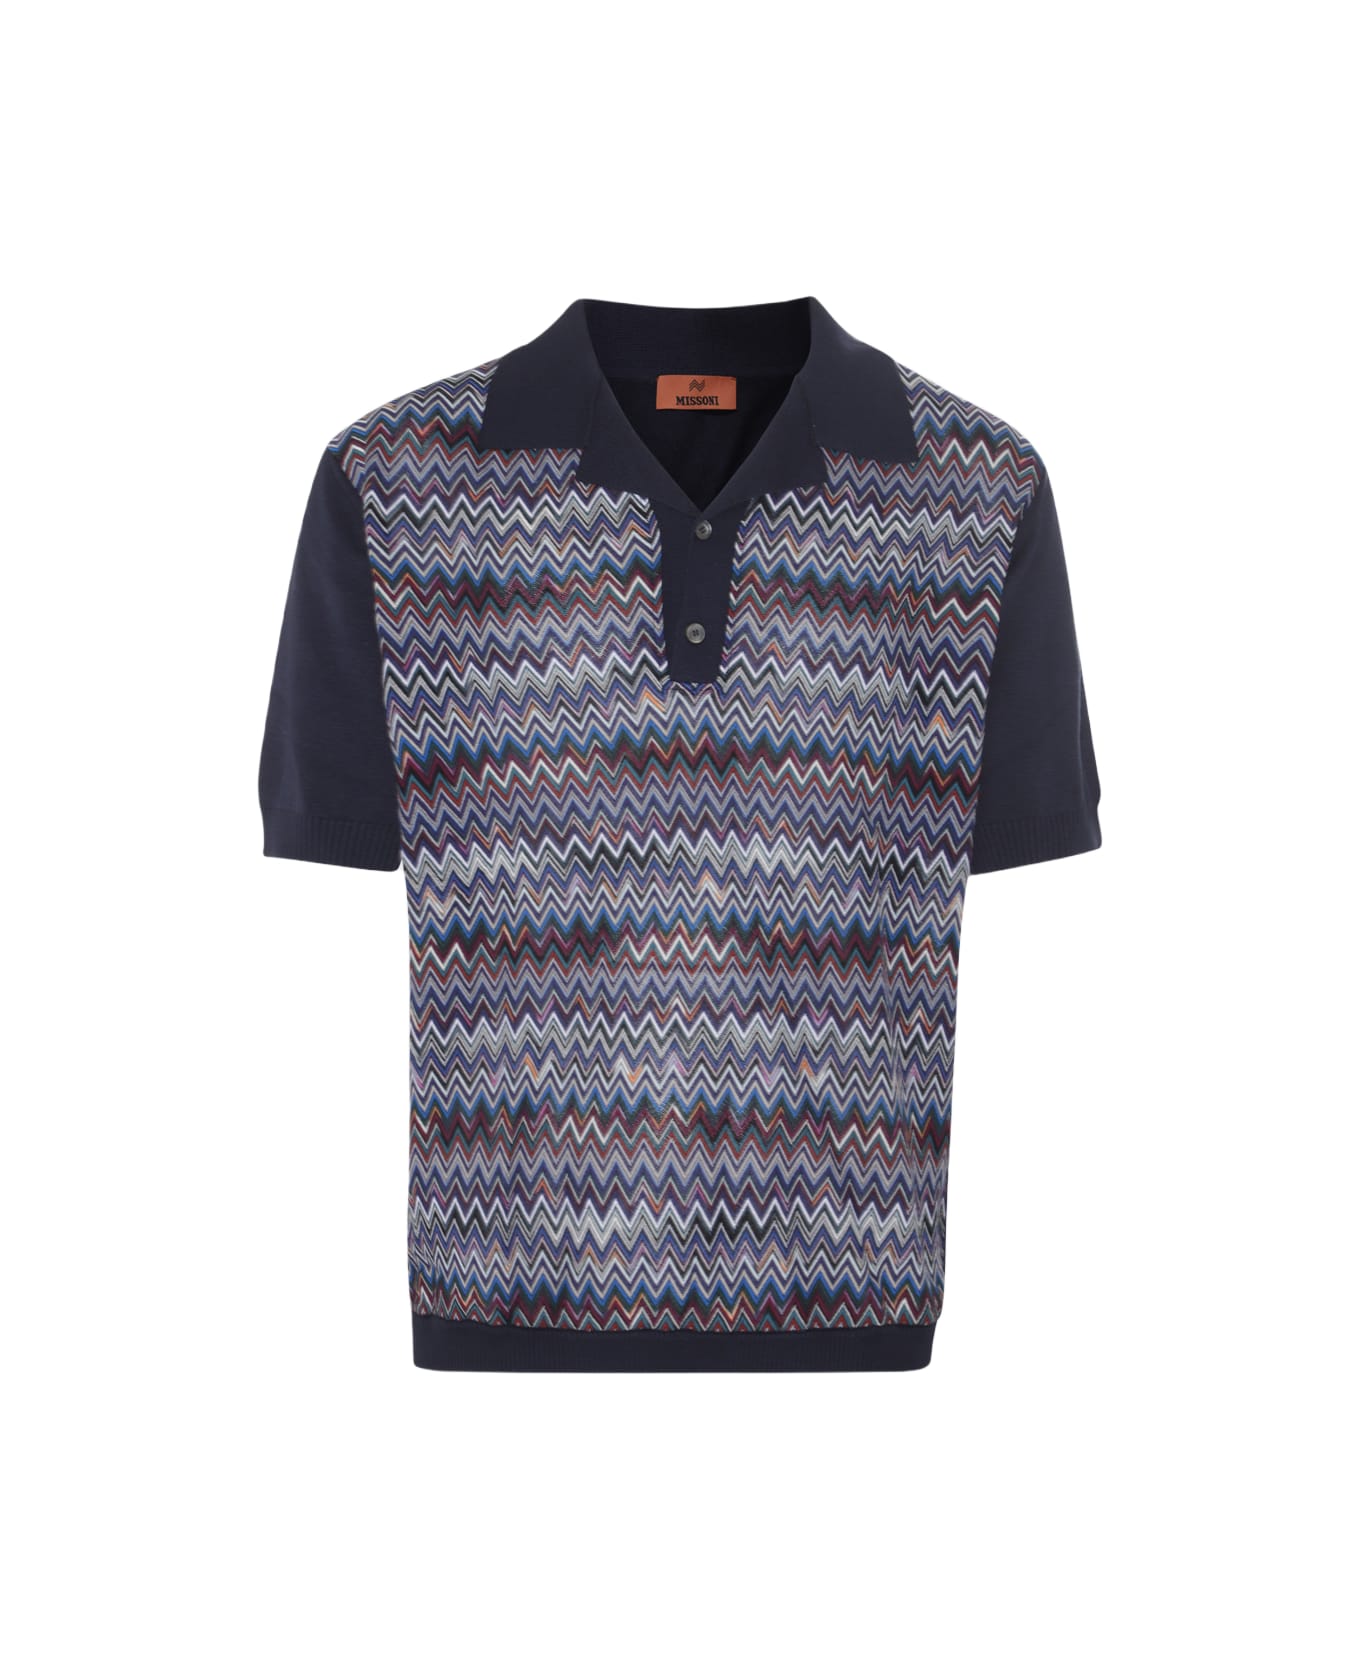 Missoni Navy And Multicolor Cotton Polo Shirt - NAVY BASE